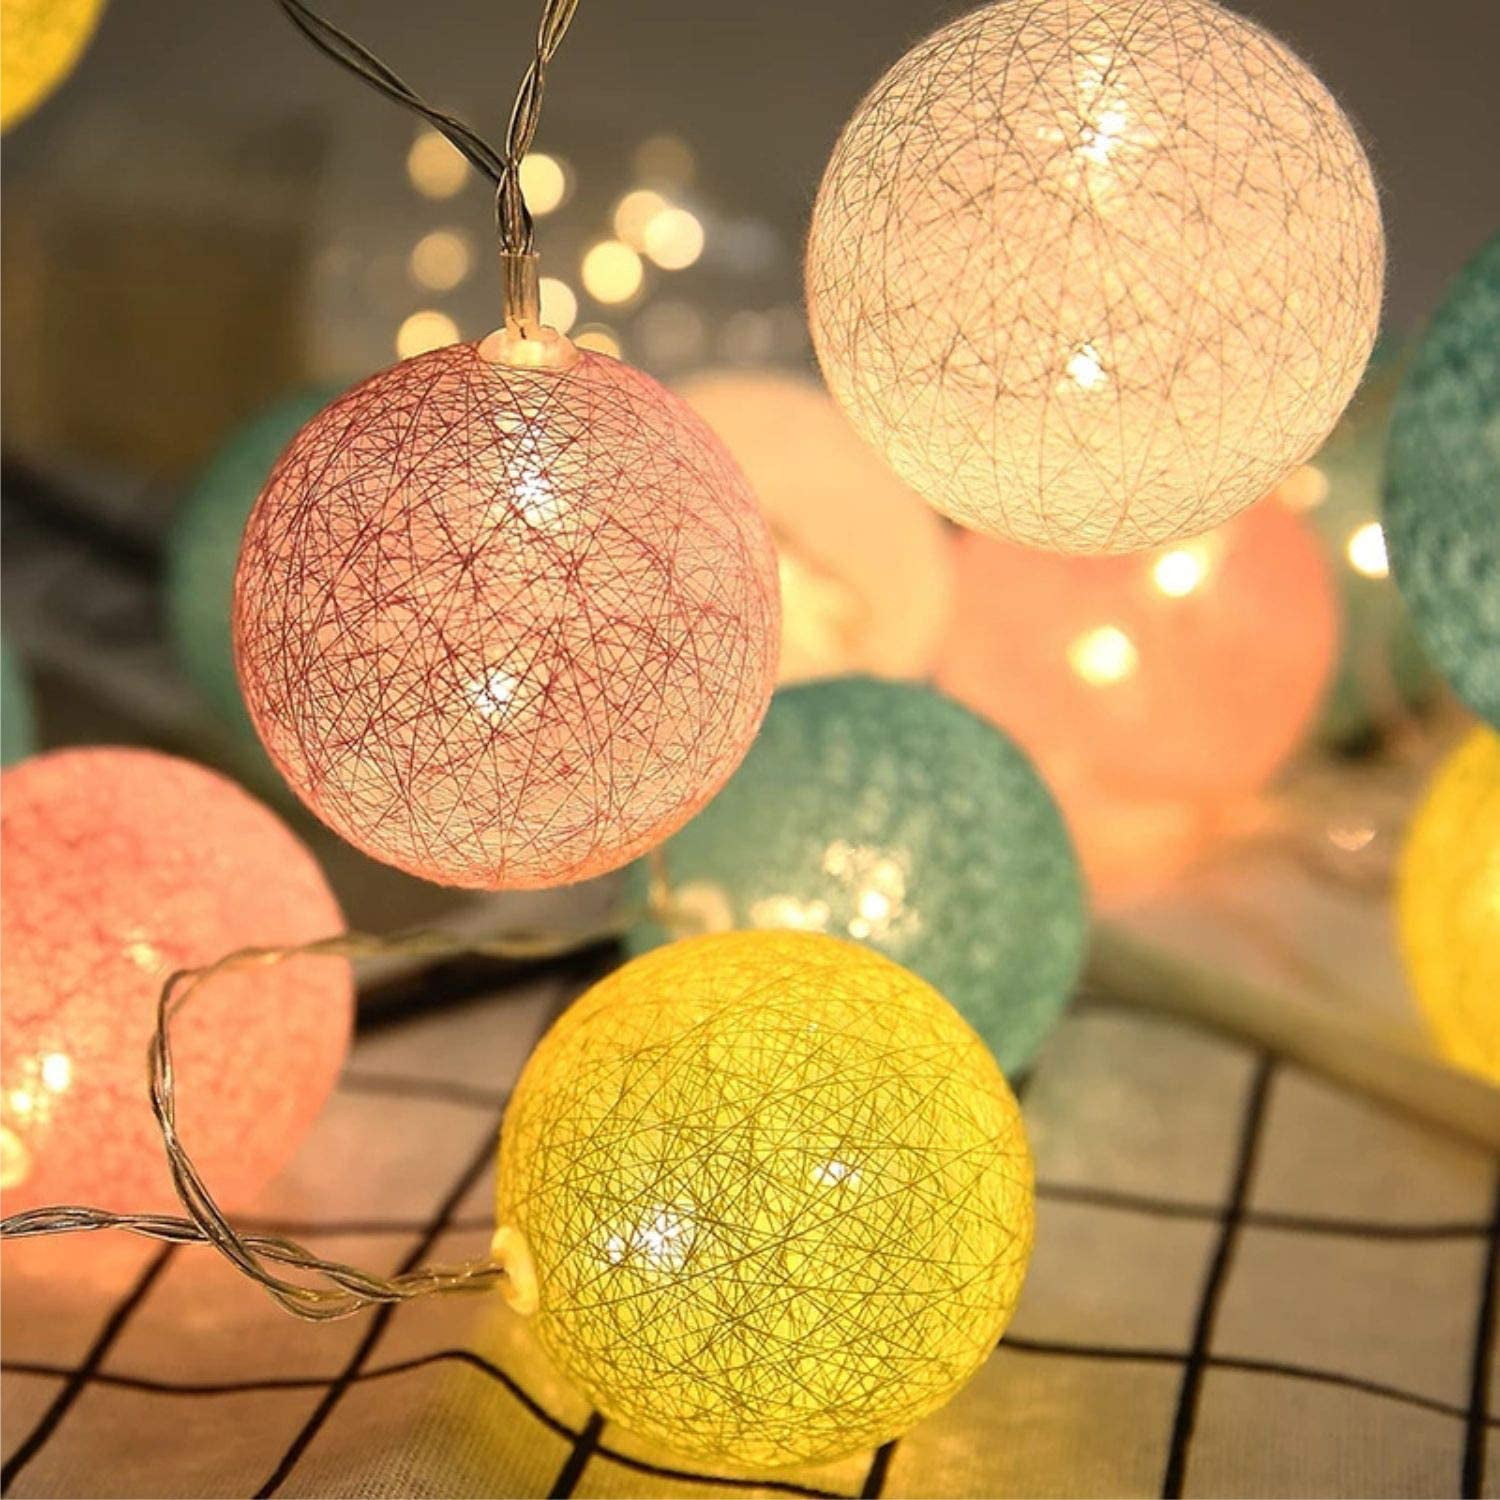 Details about   20LED 3M Cotton Ball Ball Globe String Fairy LED Lights Kid Bedroom Home DN1L1 